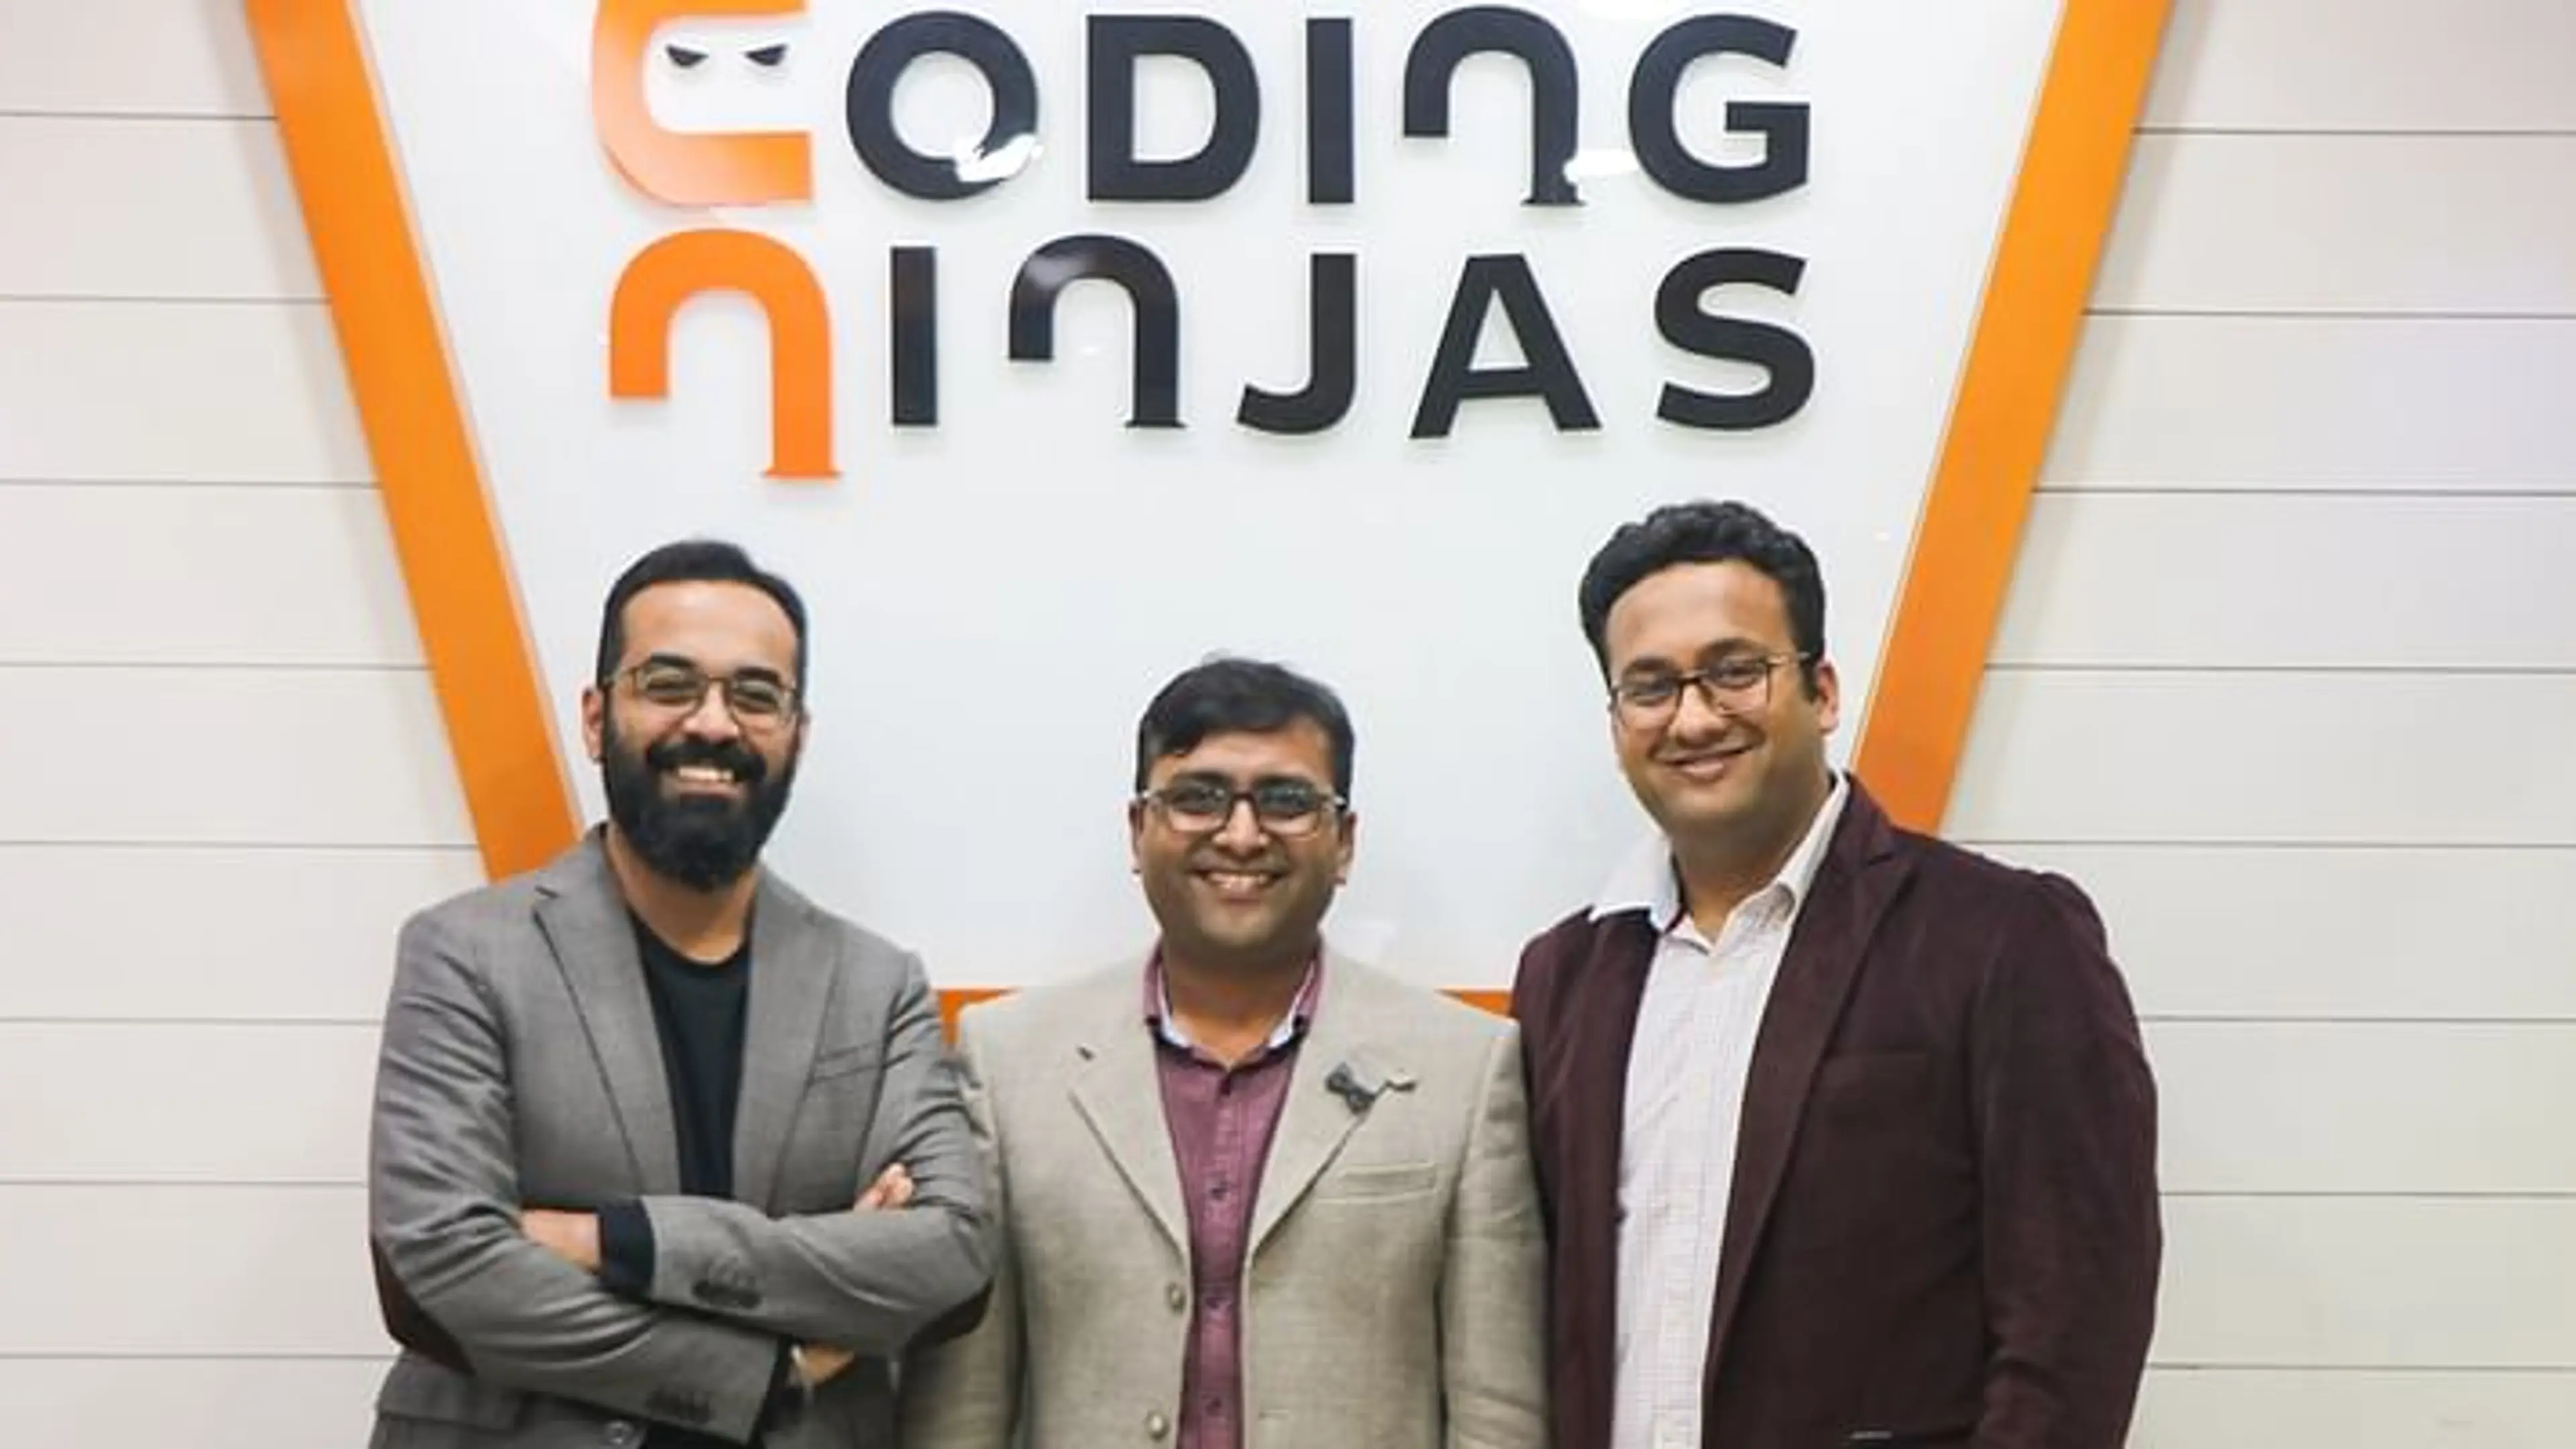 Coding Ninjas aims to crack the edtech code by reskilling and upskilling college students